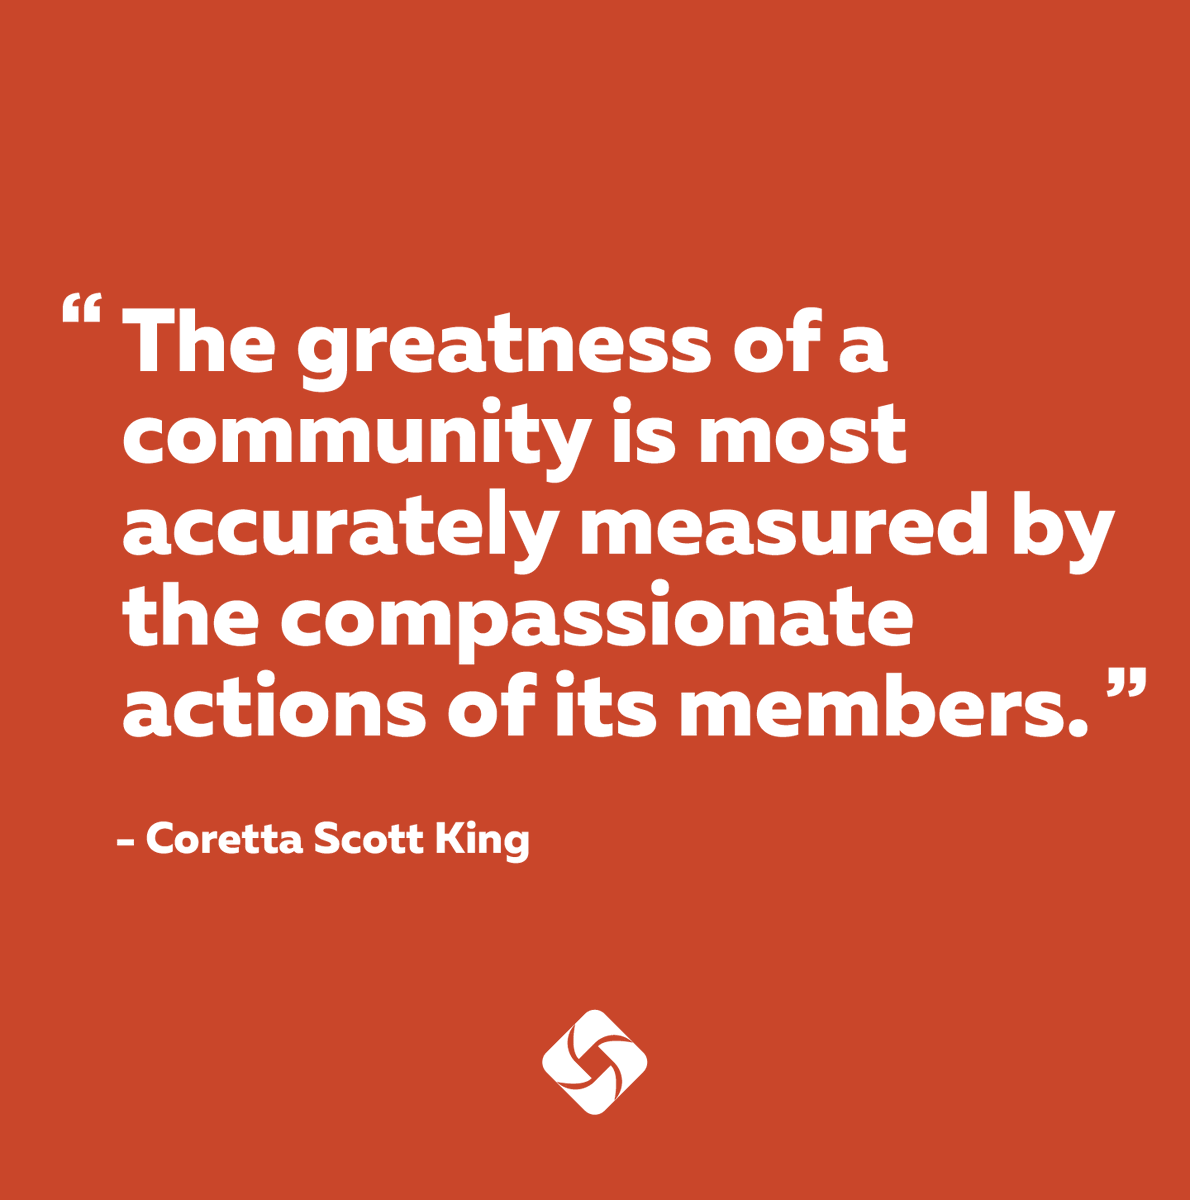 Compassion is often unseen, unmeasured and unrewarded. But the secret sauce of community is always when people go the extra mile for one another.